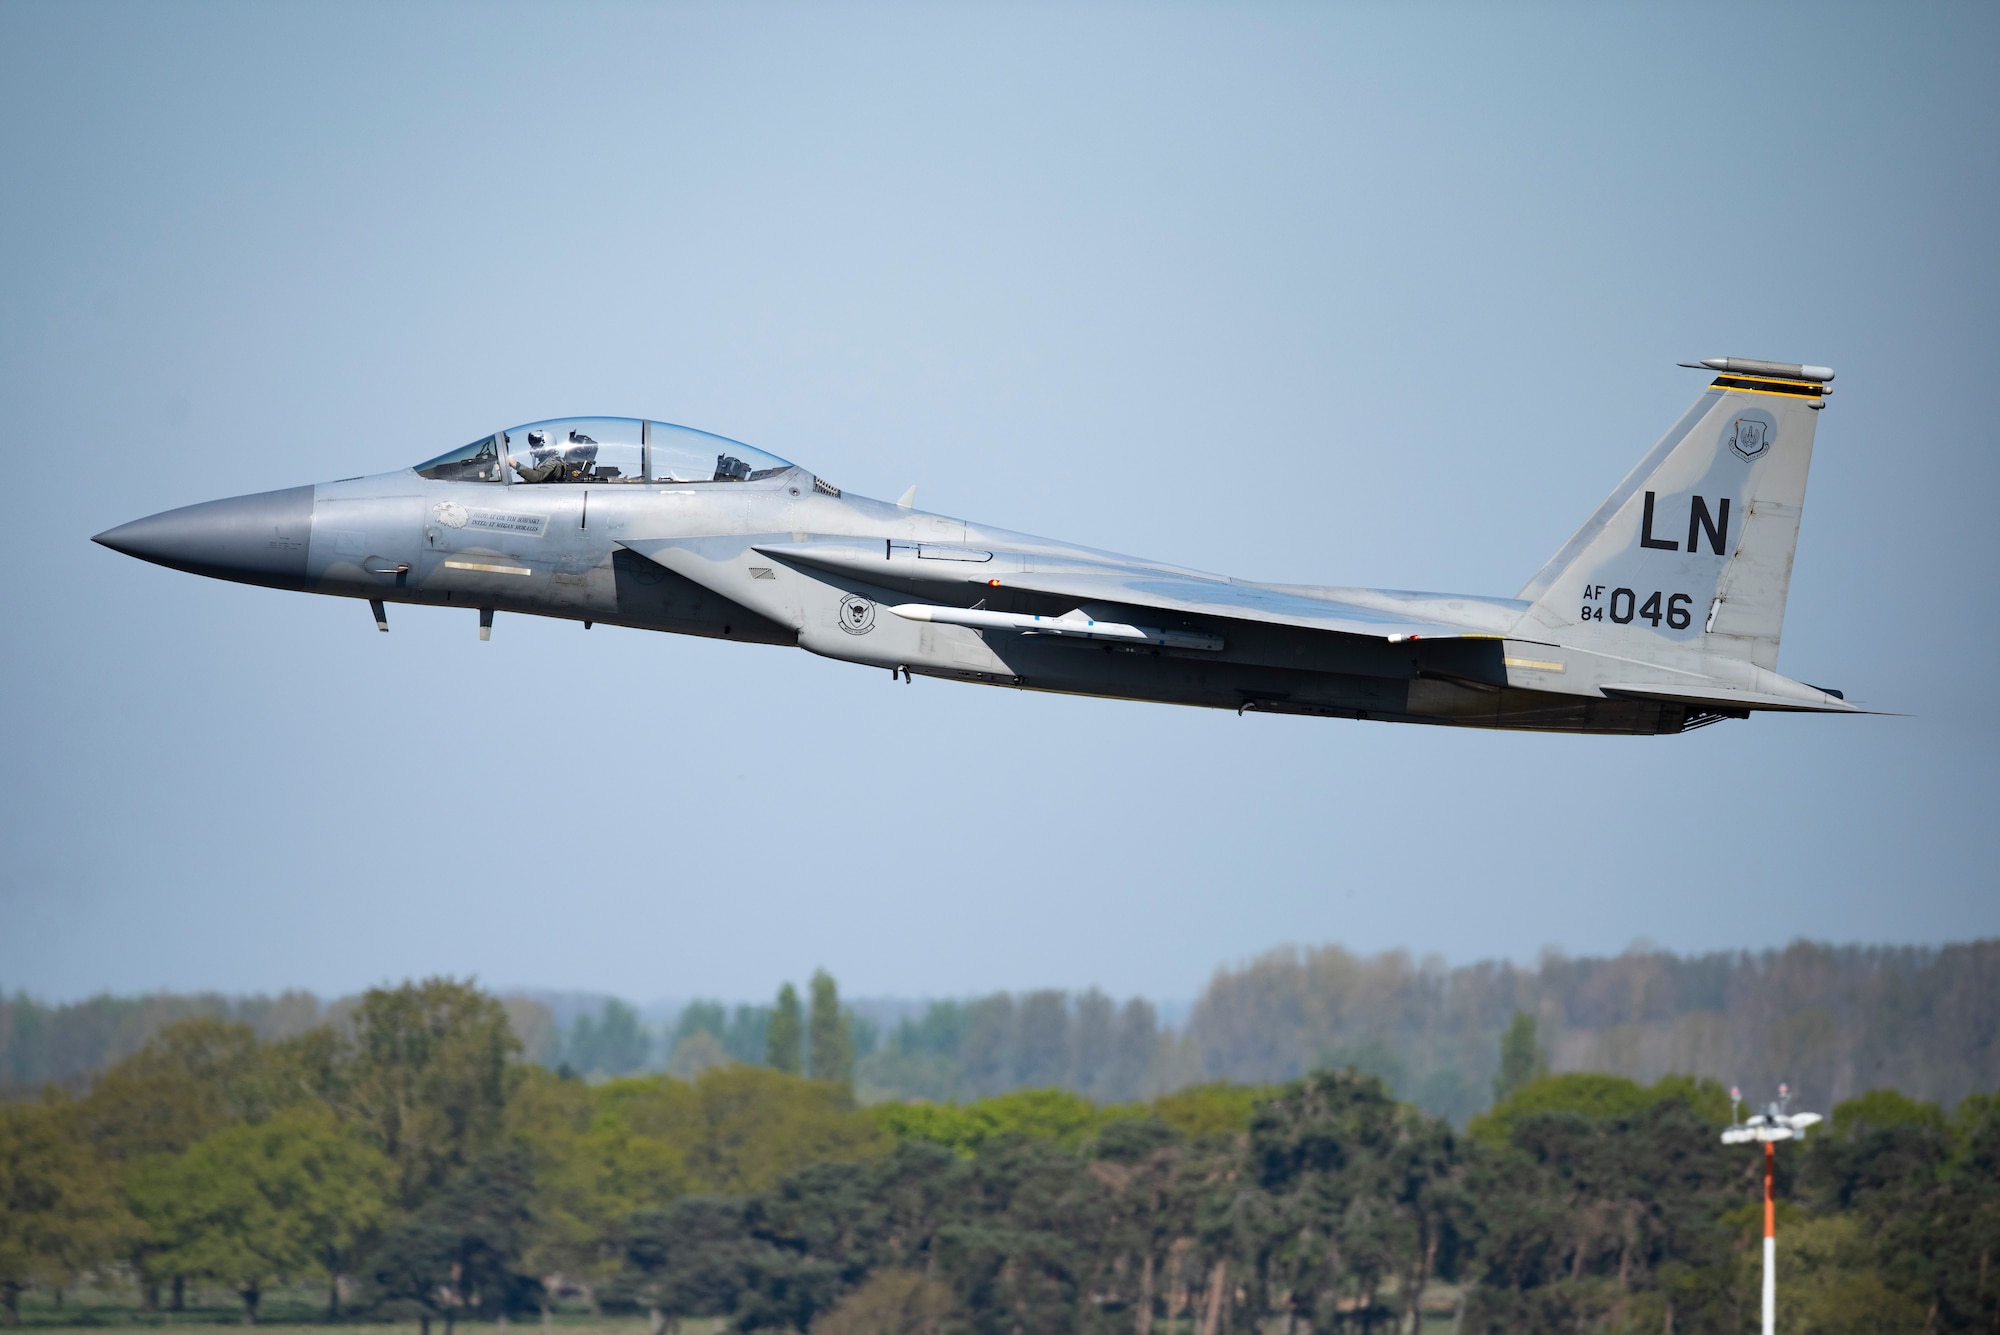 An F-15C Eagle assigned to the 493rd Fighter Squadron launches for a training sortie from Royal Air Force Lakenheath, England, April 15, 2020. The 493rd FS conducts daily routine training to ensure the Liberty Wing brings unique air combat capabilities to the fight when called upon by United States Air Forces in Europe-Air Forces Africa.
(U.S. Air Force photo by Airman 1st Class Madeline Herzog)